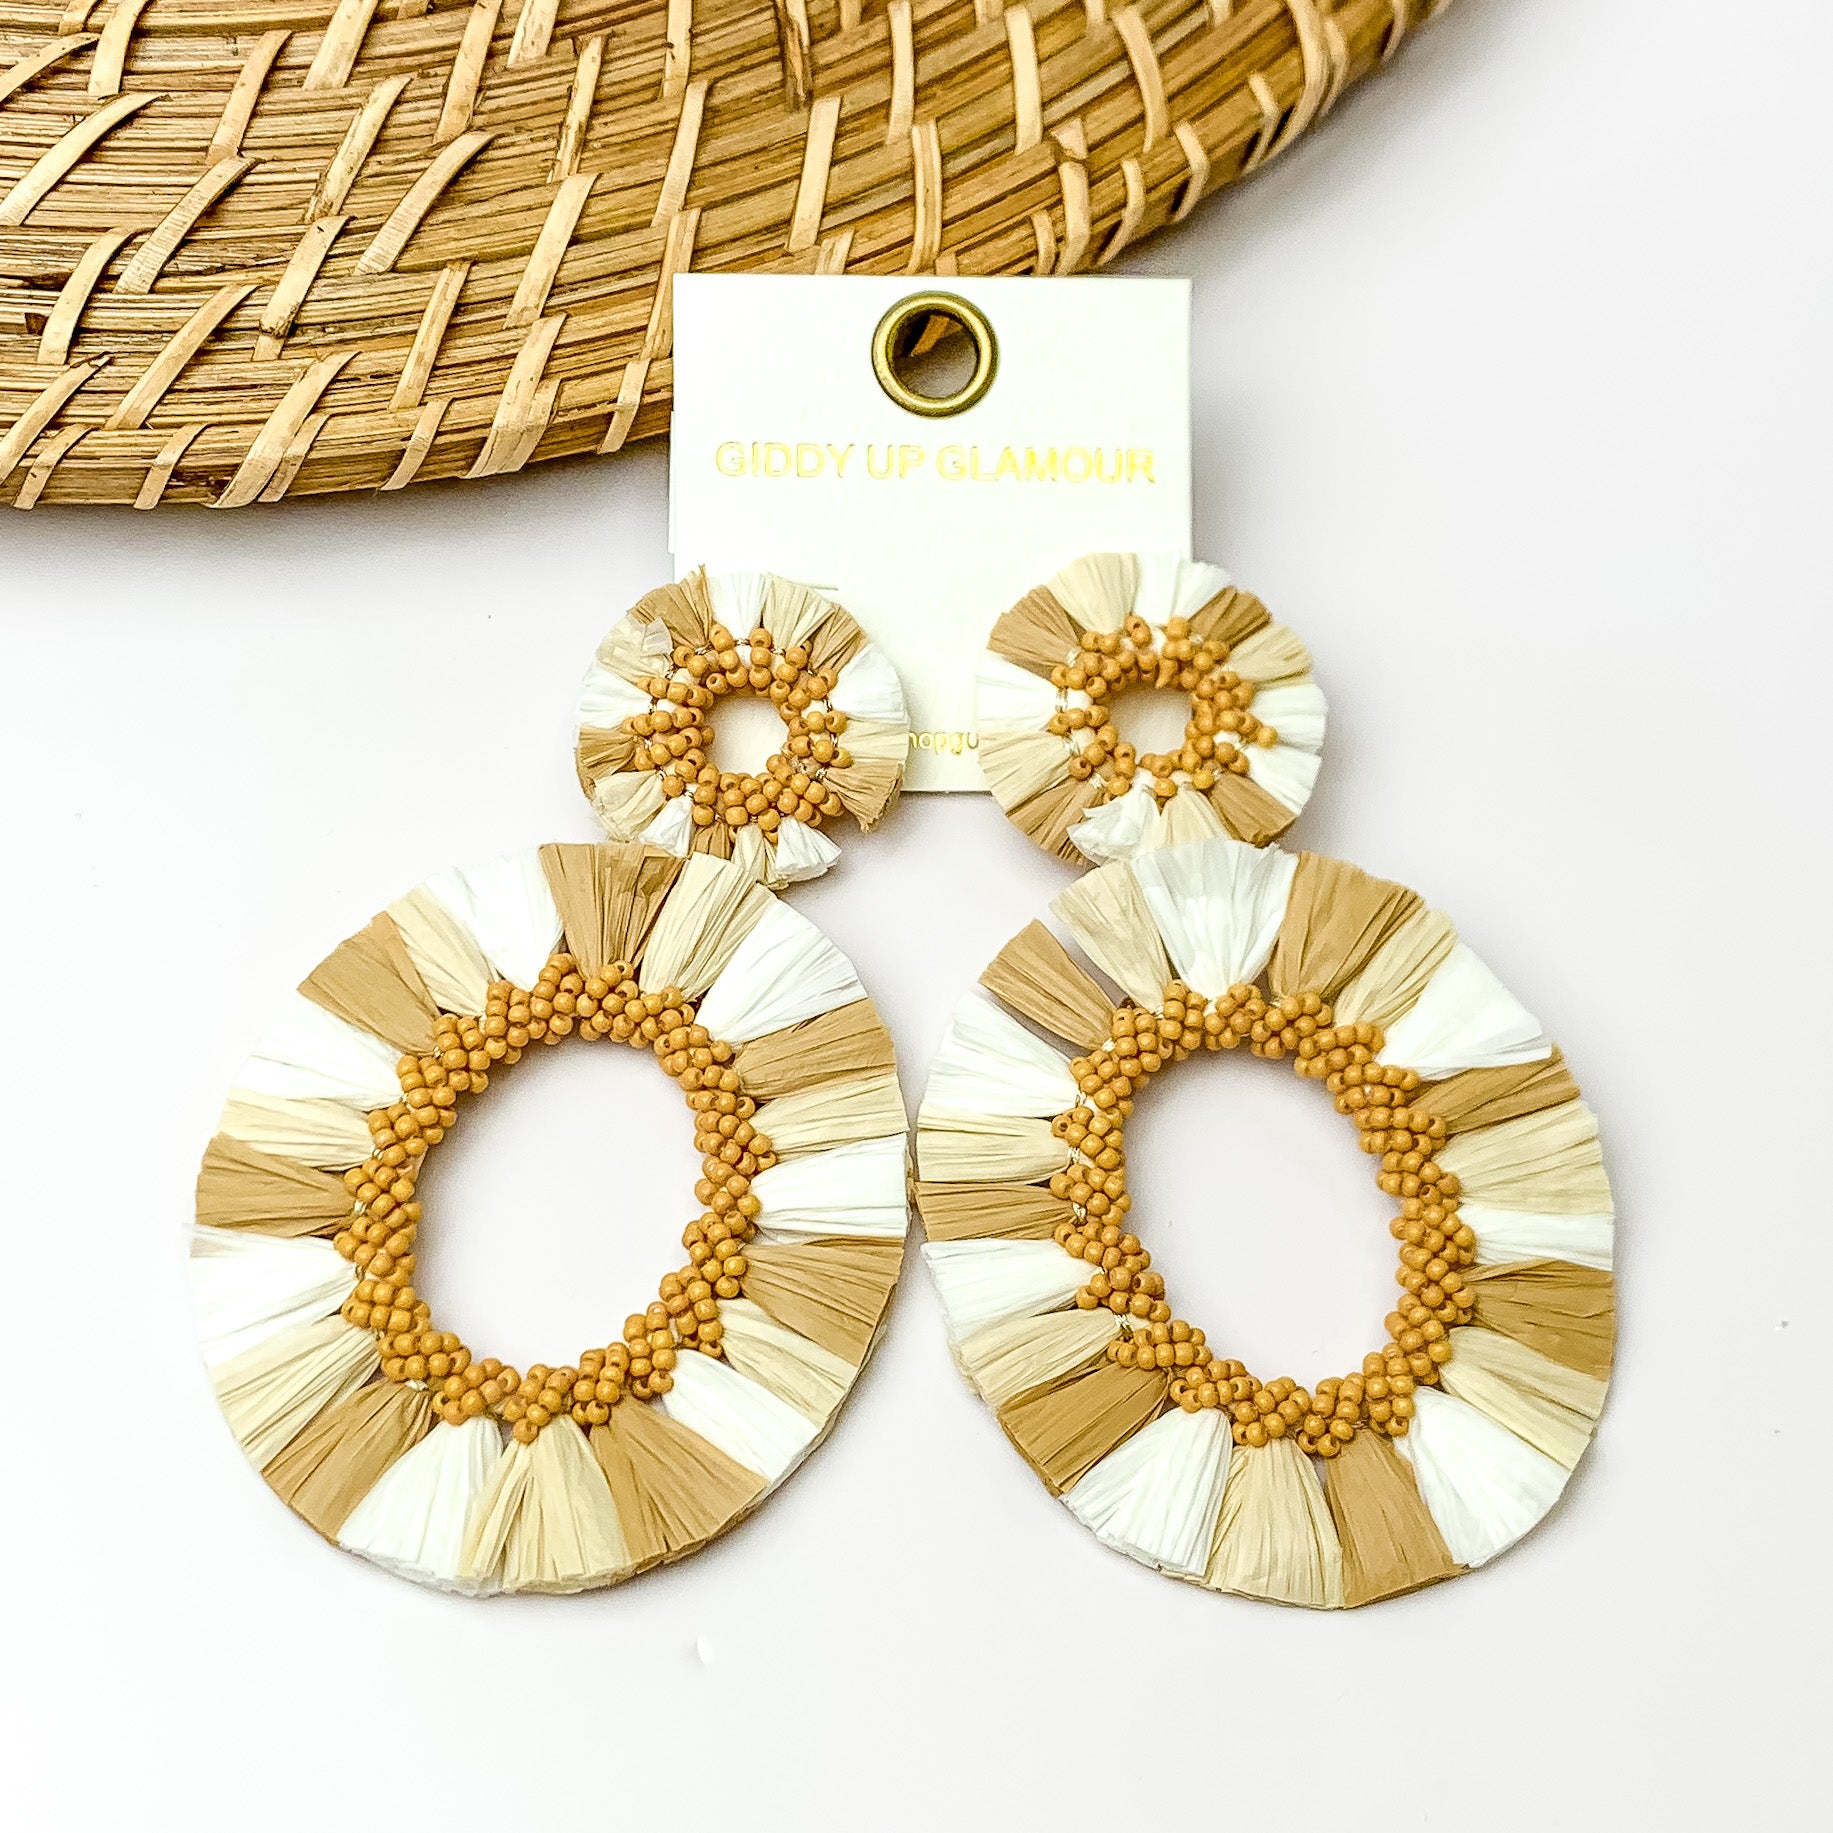 White and shades of tan open hoop earrings with tan beads on the inside. Pictured with a white background and wood decorations in the top left corner.